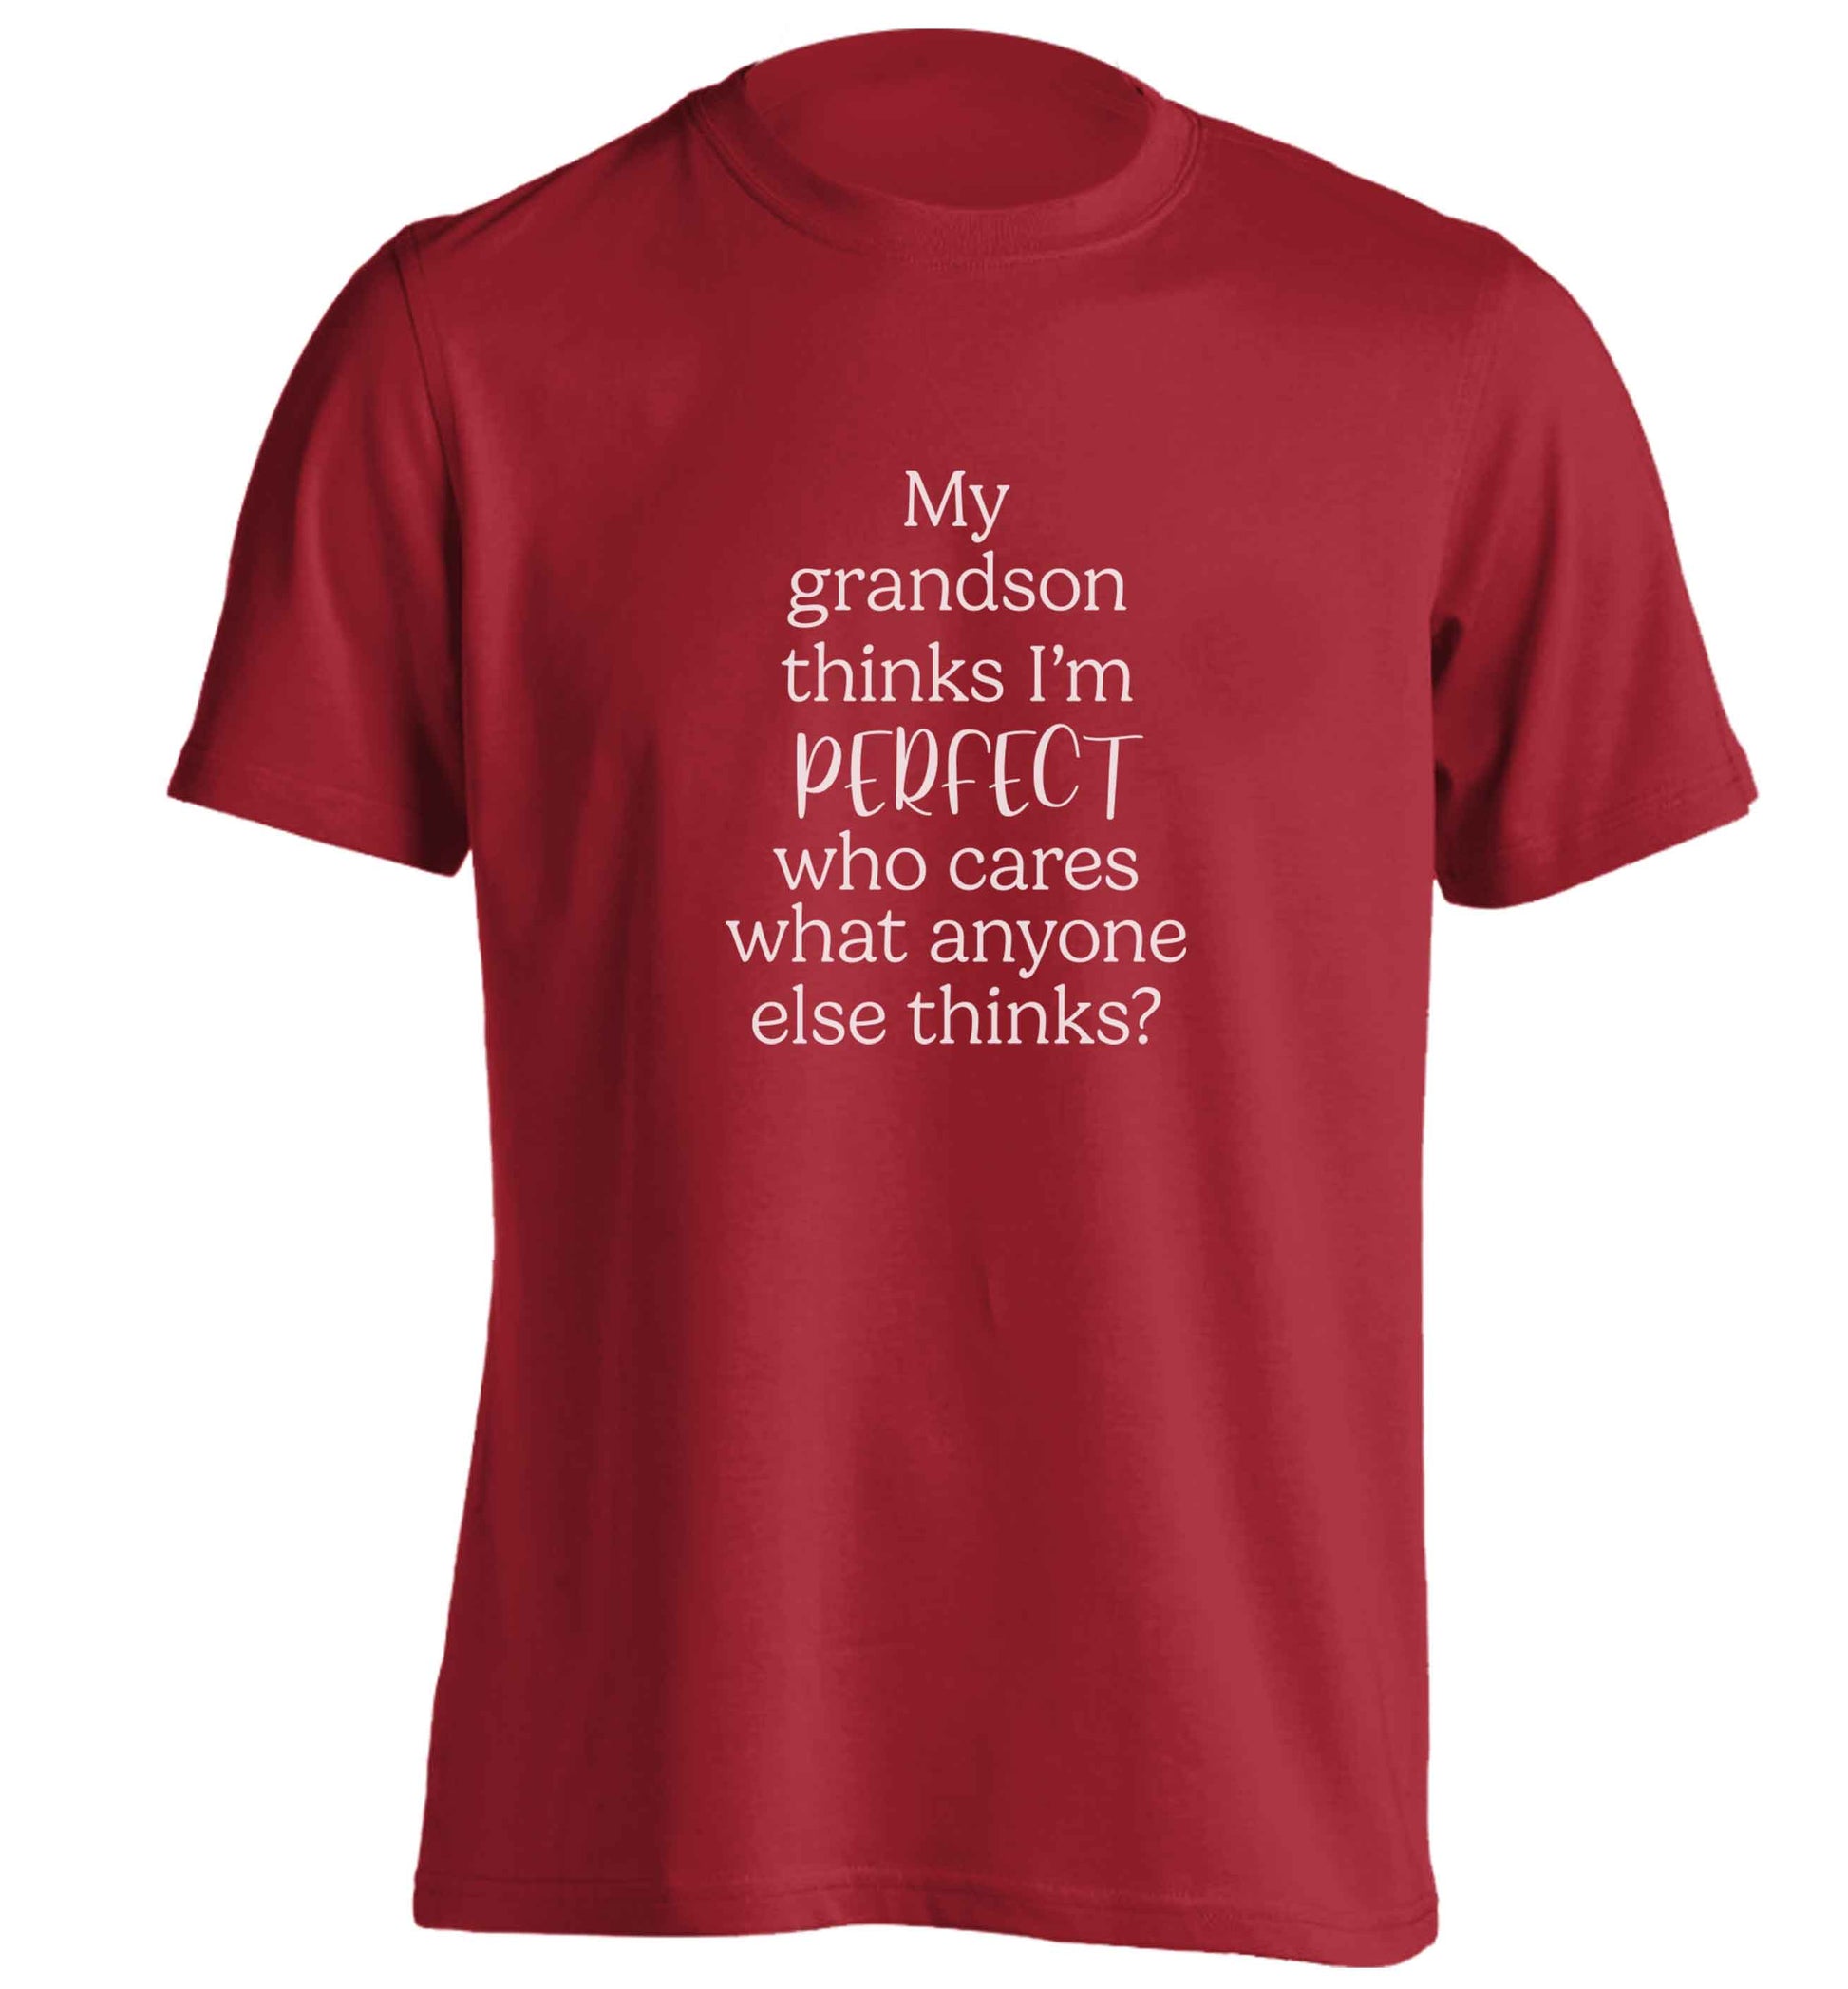 My Grandson thinks I'm perfect who cares what anyone else thinks? adults unisex red Tshirt 2XL